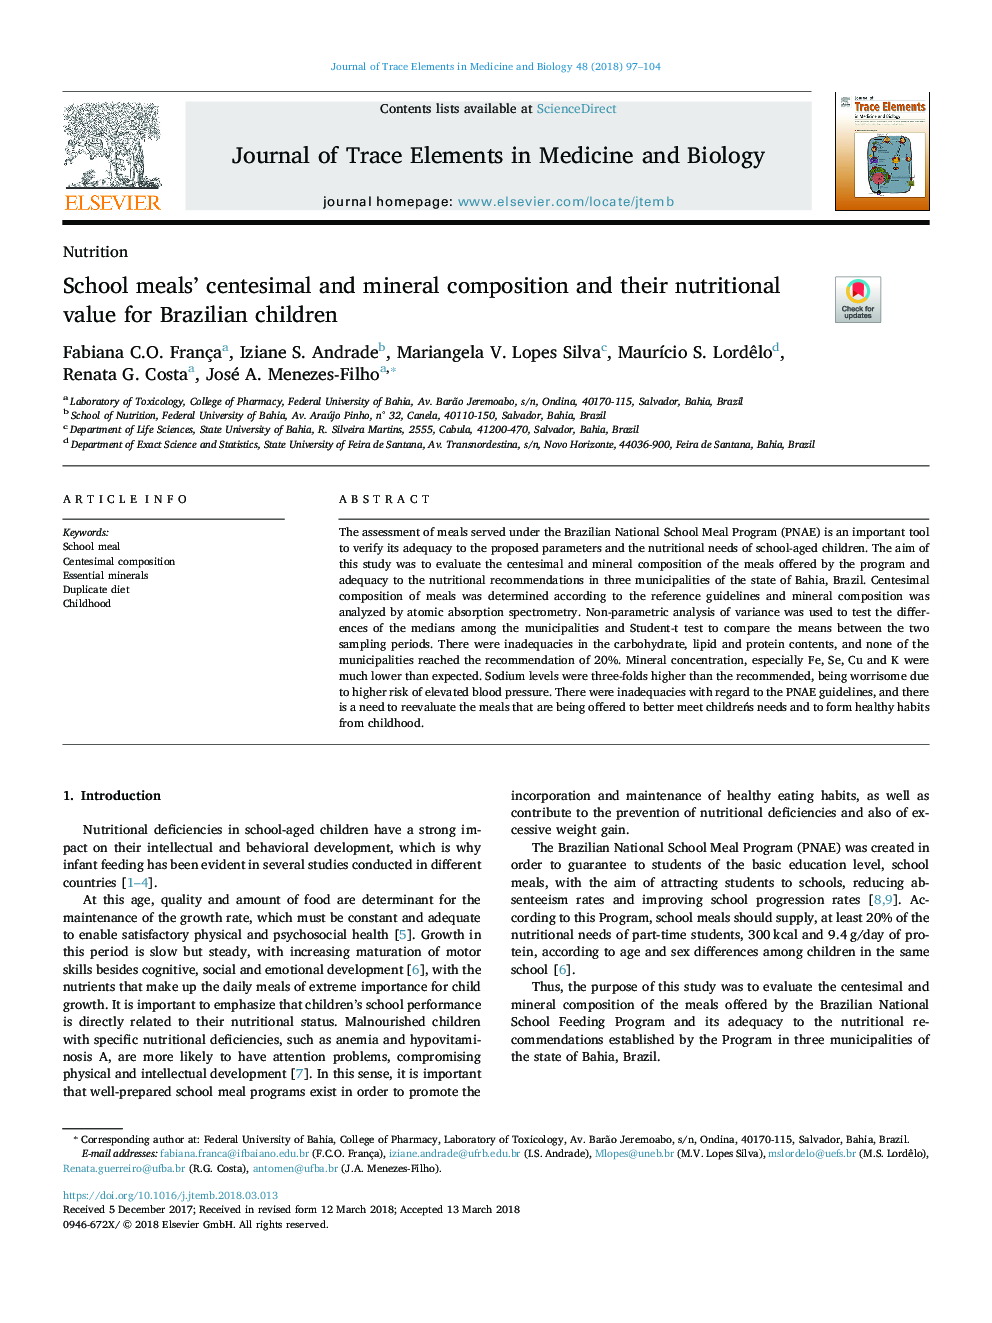 School meals' centesimal and mineral composition and their nutritional value for Brazilian children